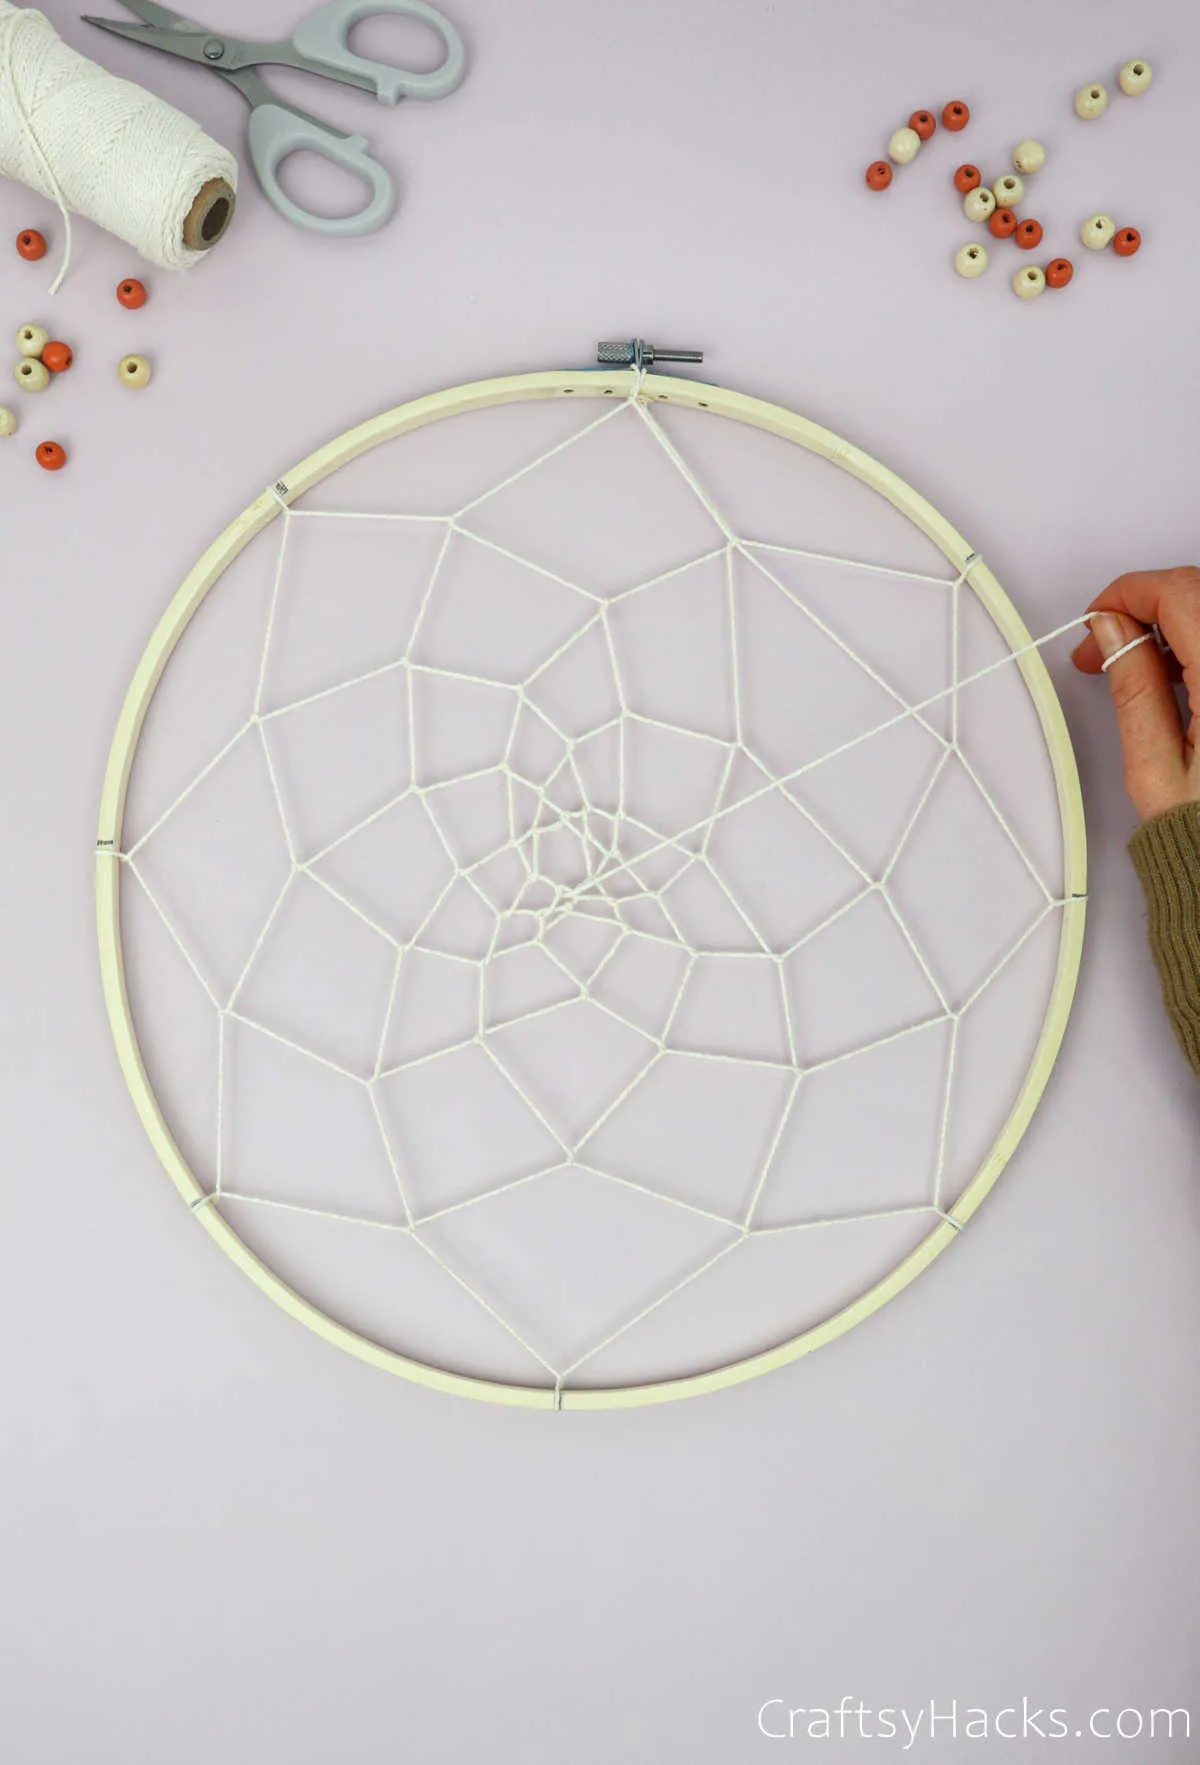 attaching string in middle of hoop